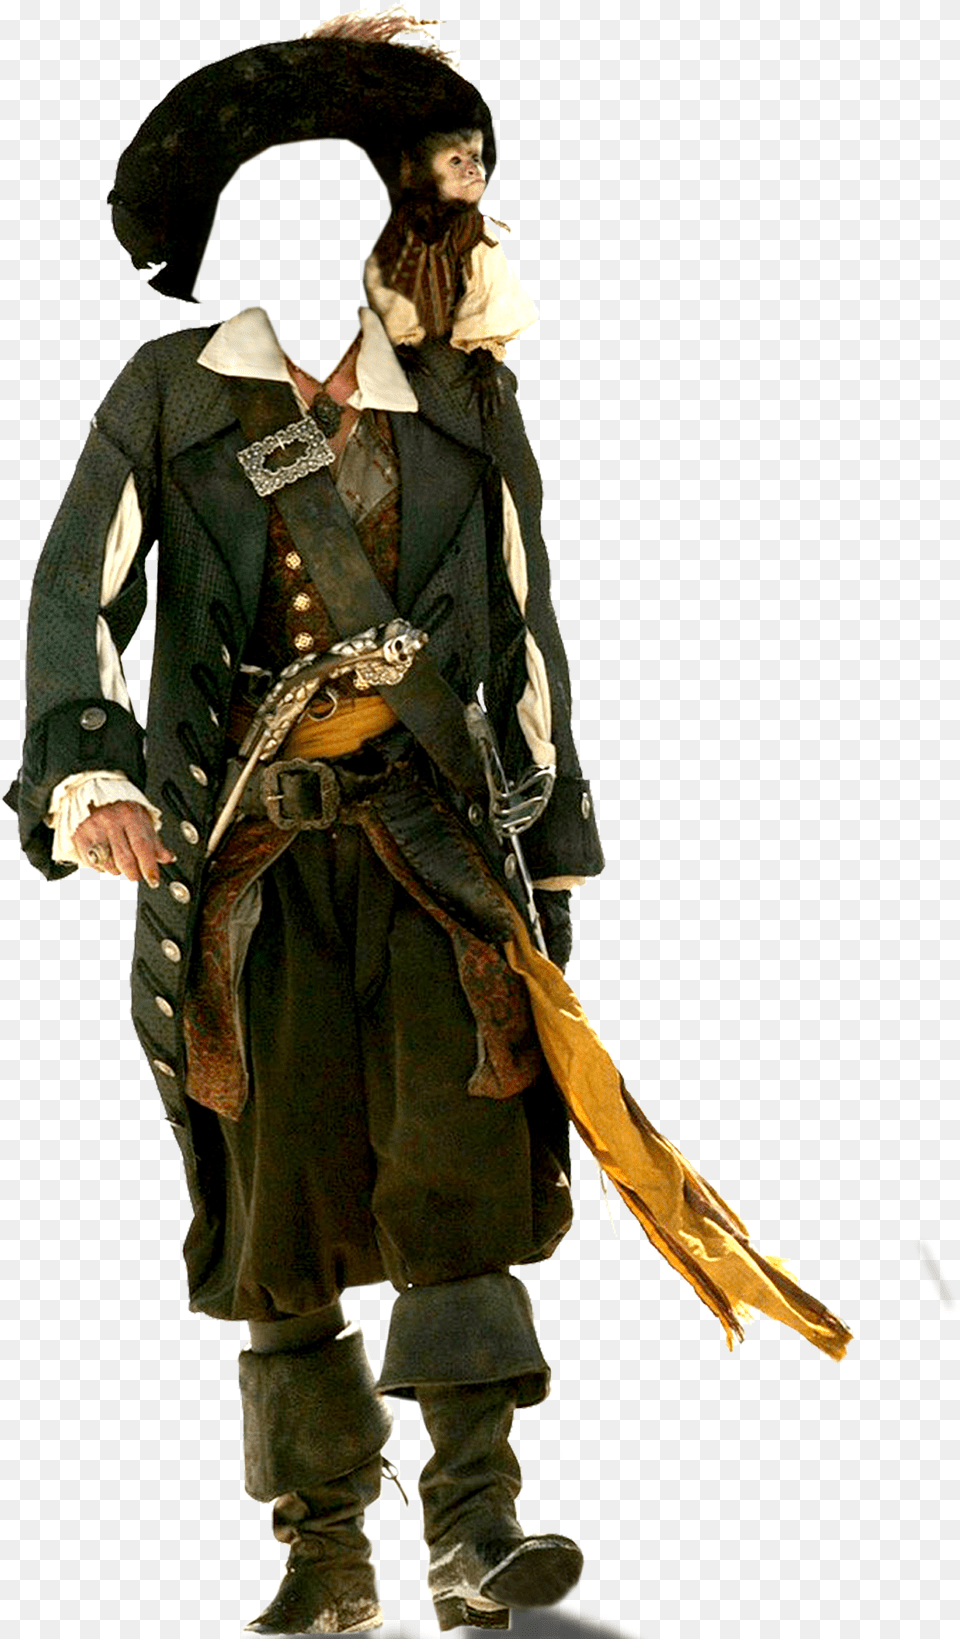 Clipart Coat Pirate Jack Sparrow Elizabeth Barbossa, Clothing, Adult, Person, Female Png